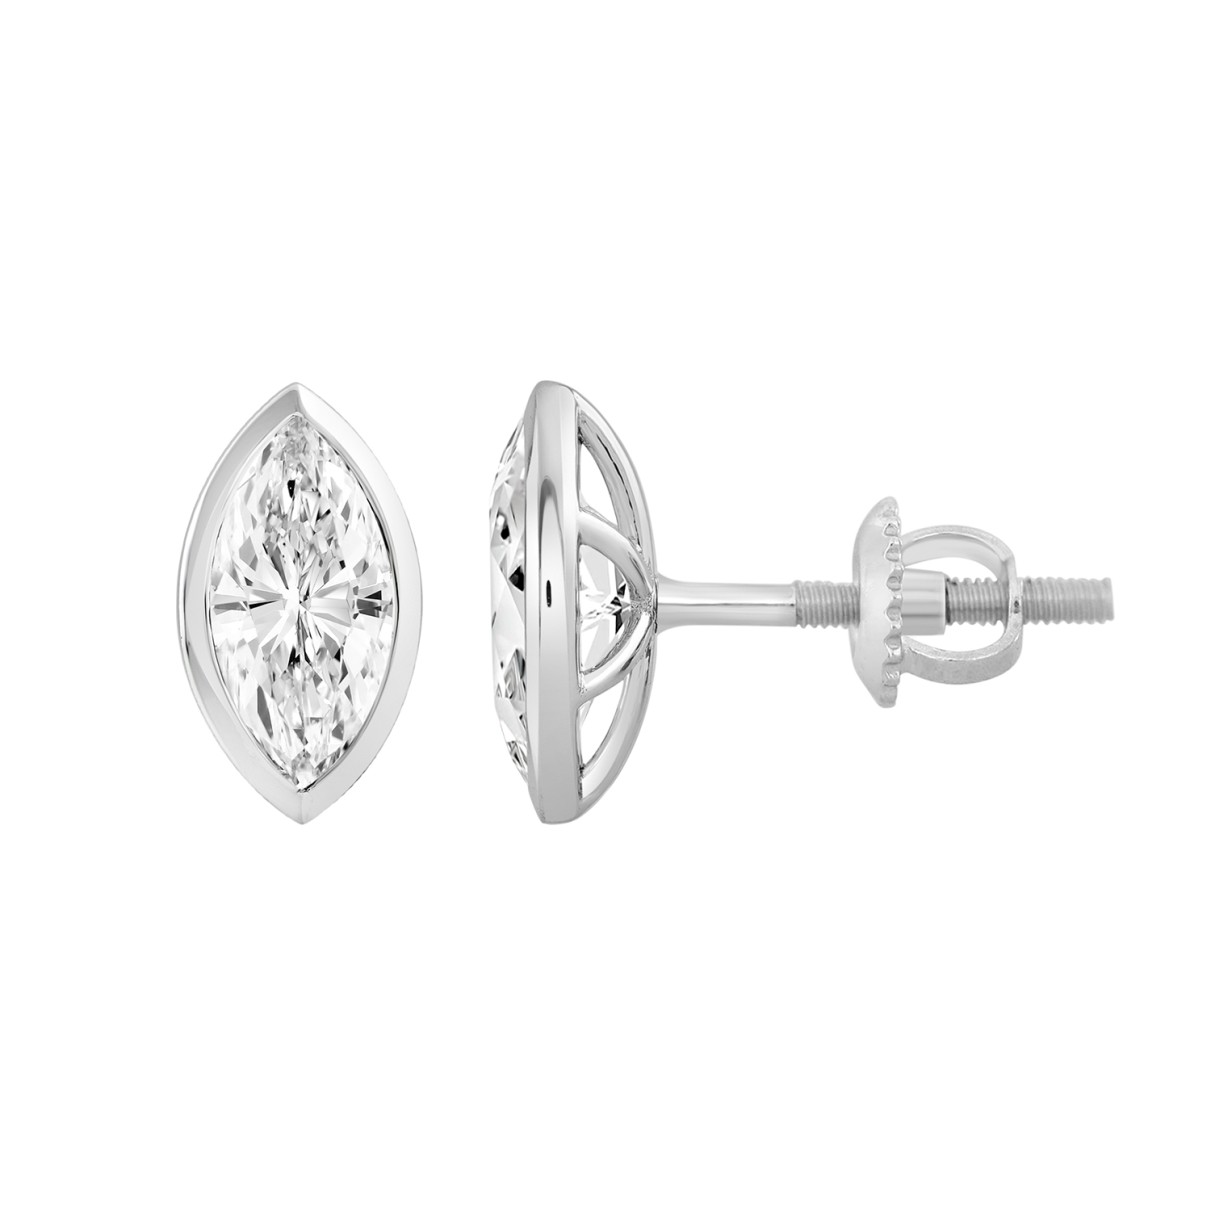 LADIES SOLITAIRE EARRINGS  2CT MARQUISE DIAMOND 14K WHITE GOLD